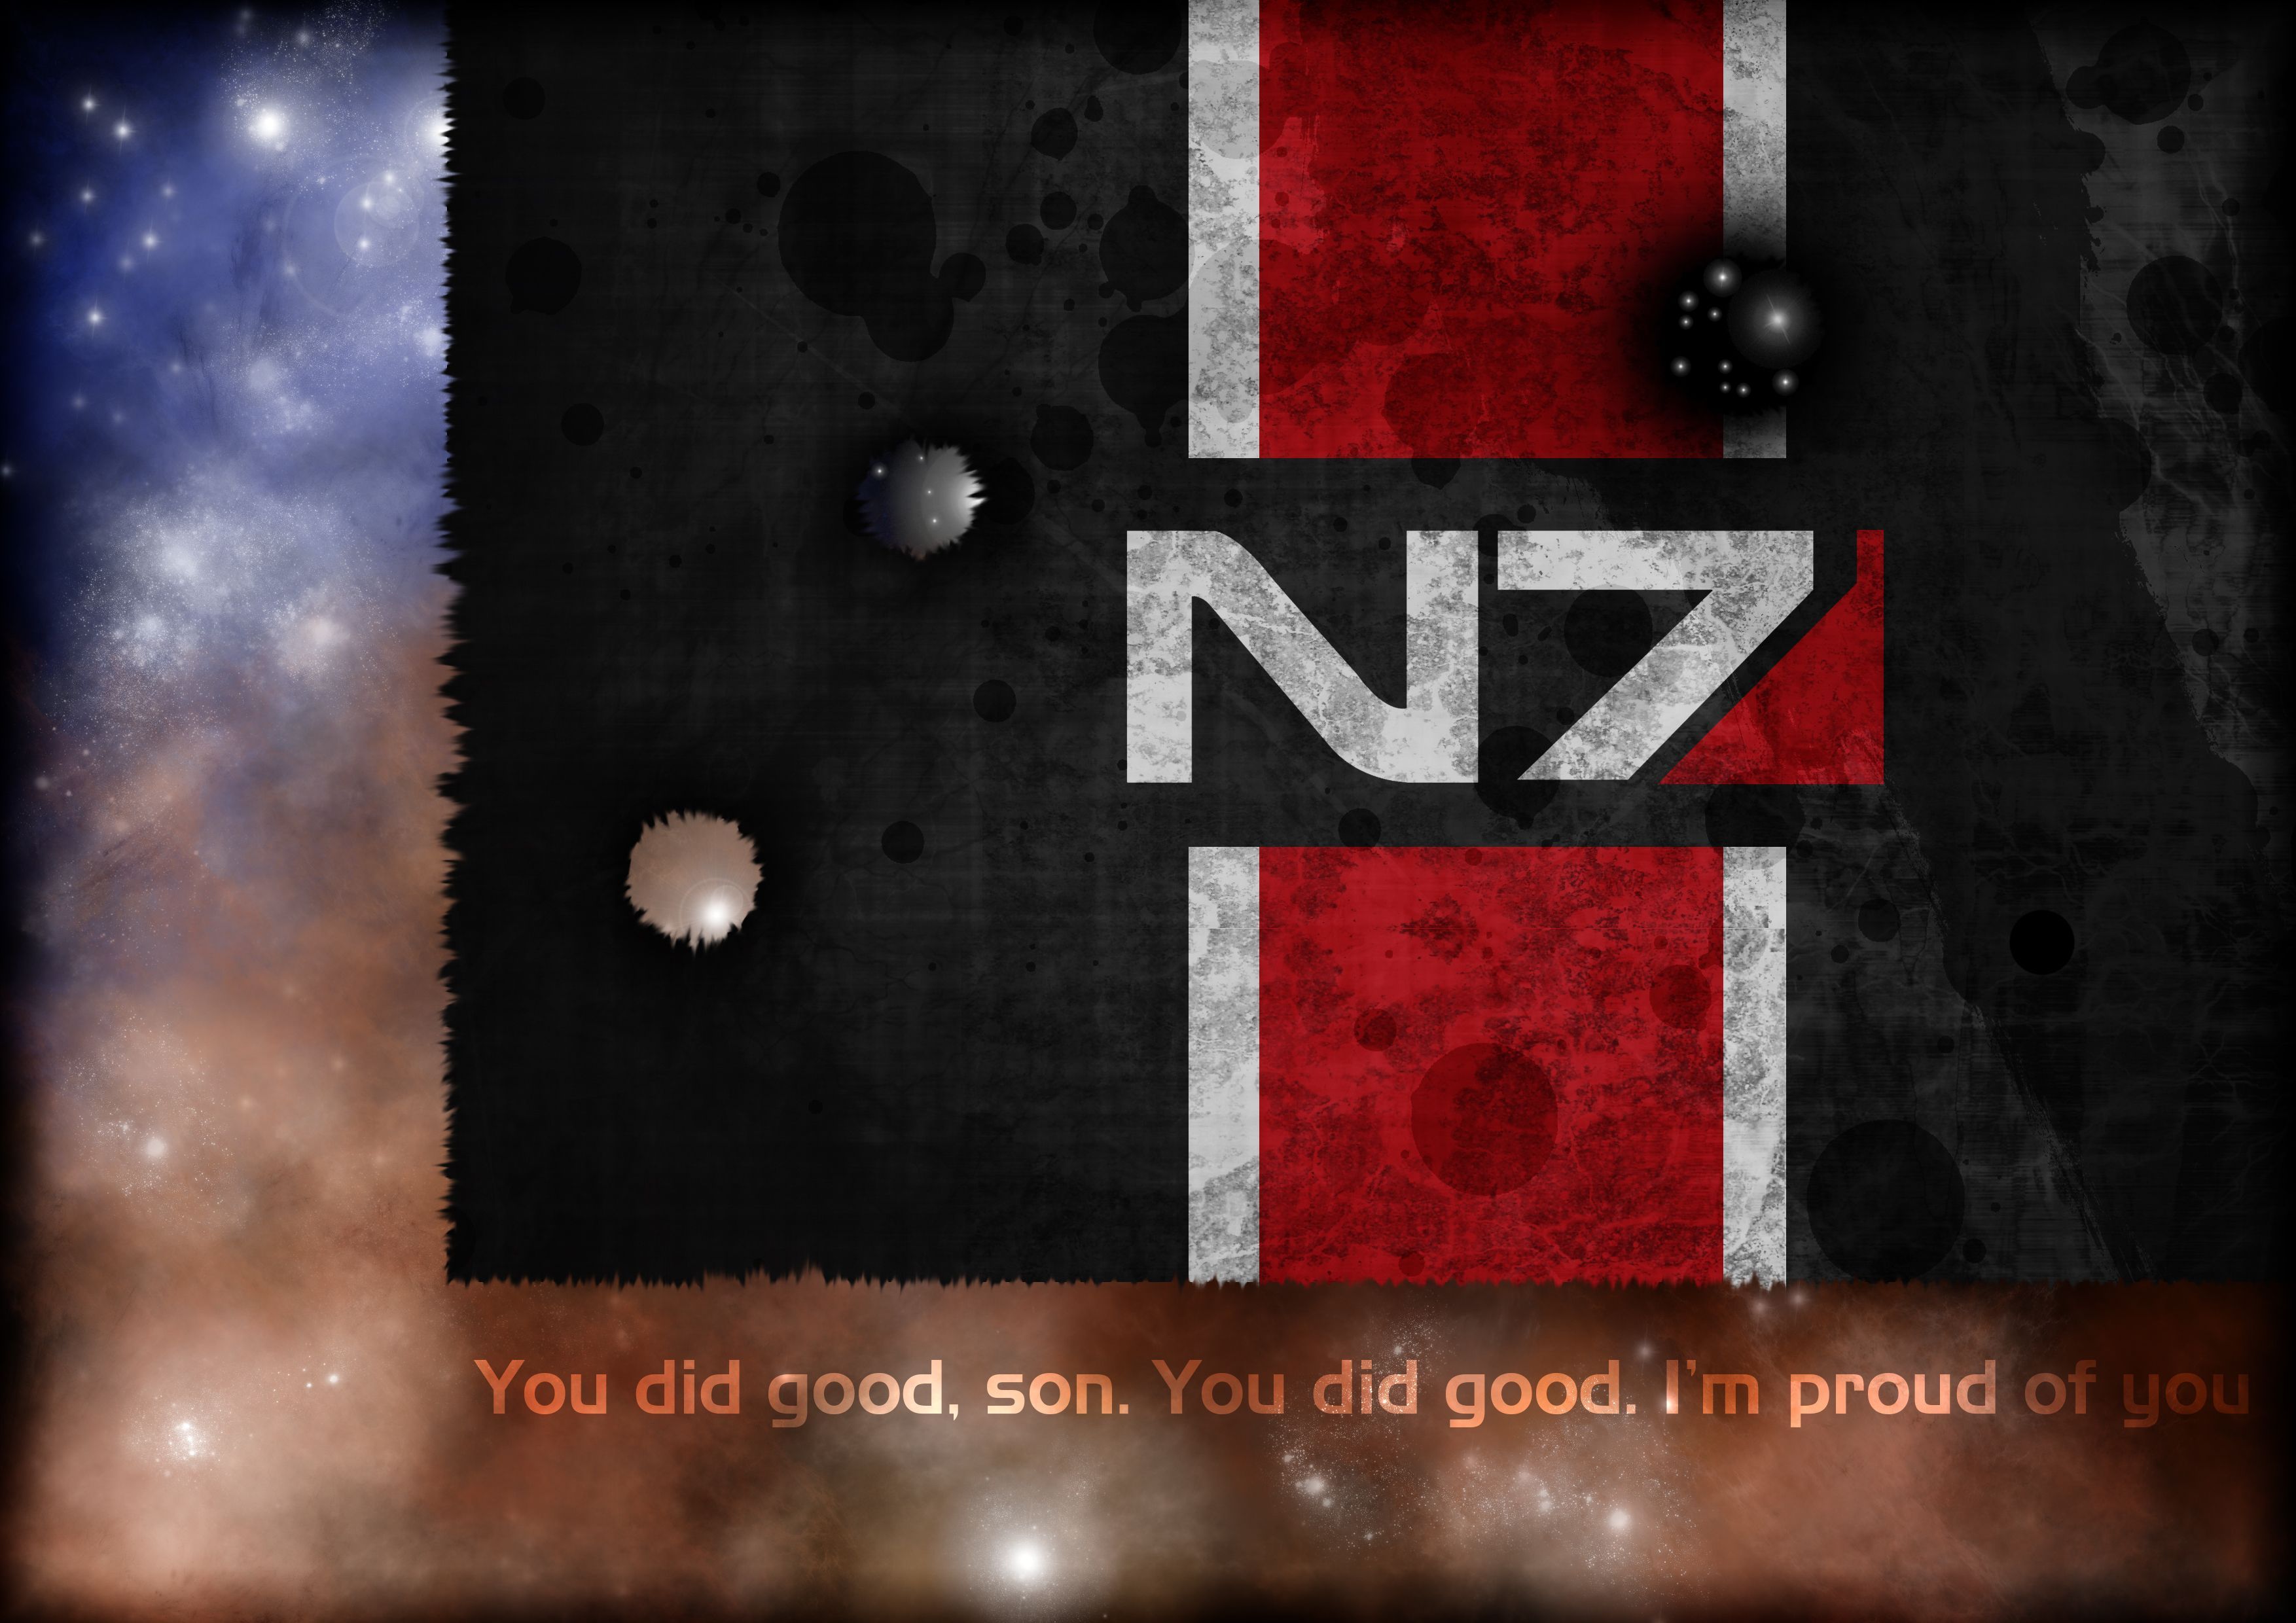 An homage to N7 - wallpaper I did this evening : masseffect